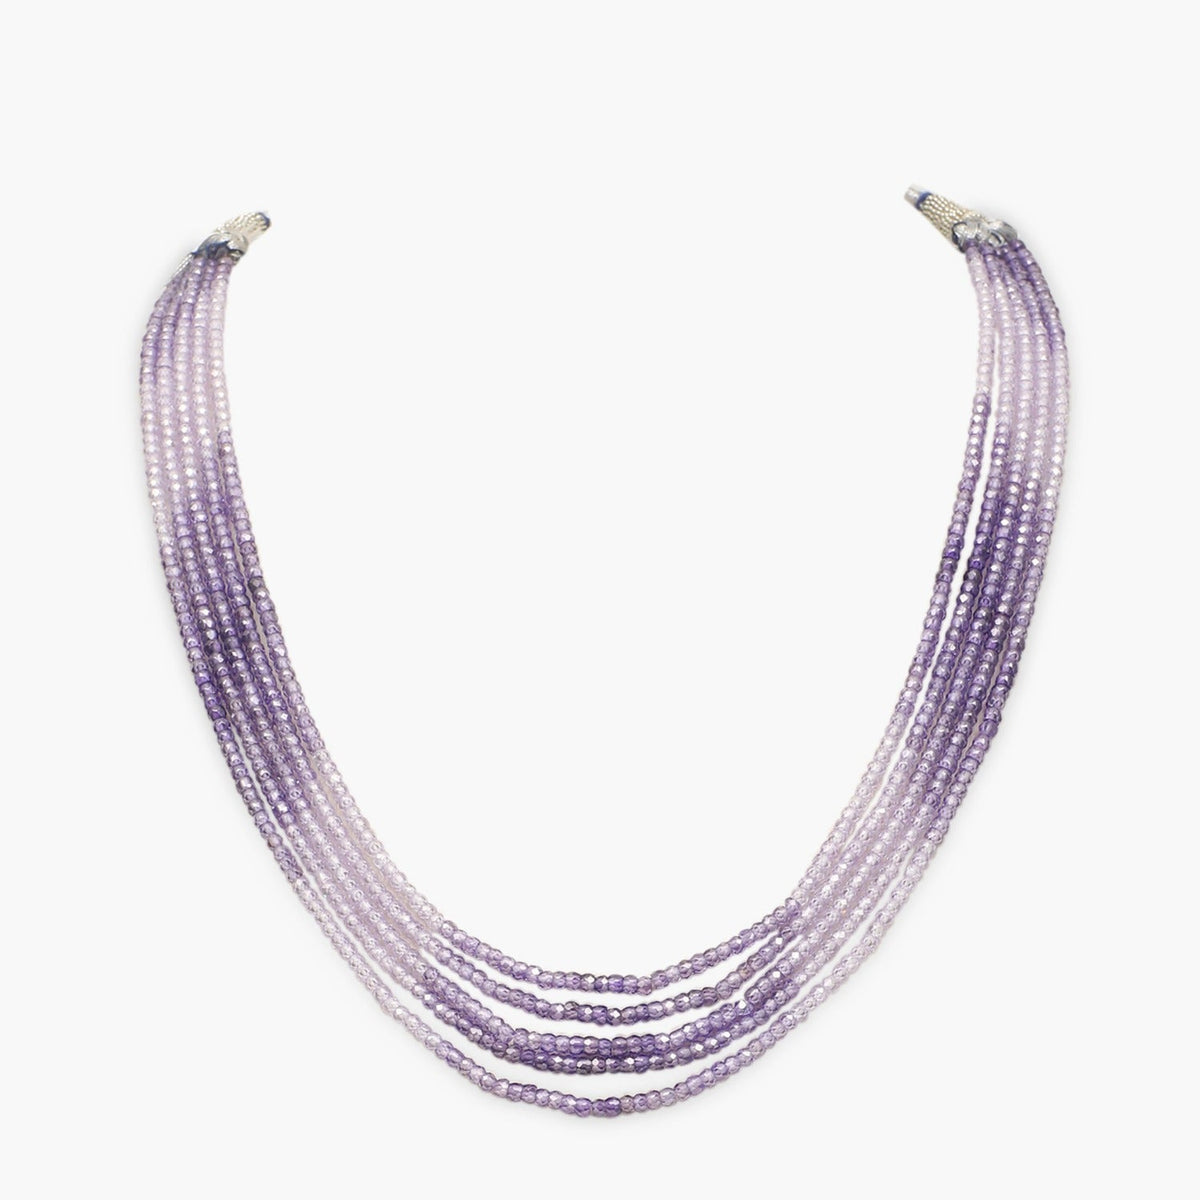 Purple shaded Faceted Cubic Zirconia Beads Necklace